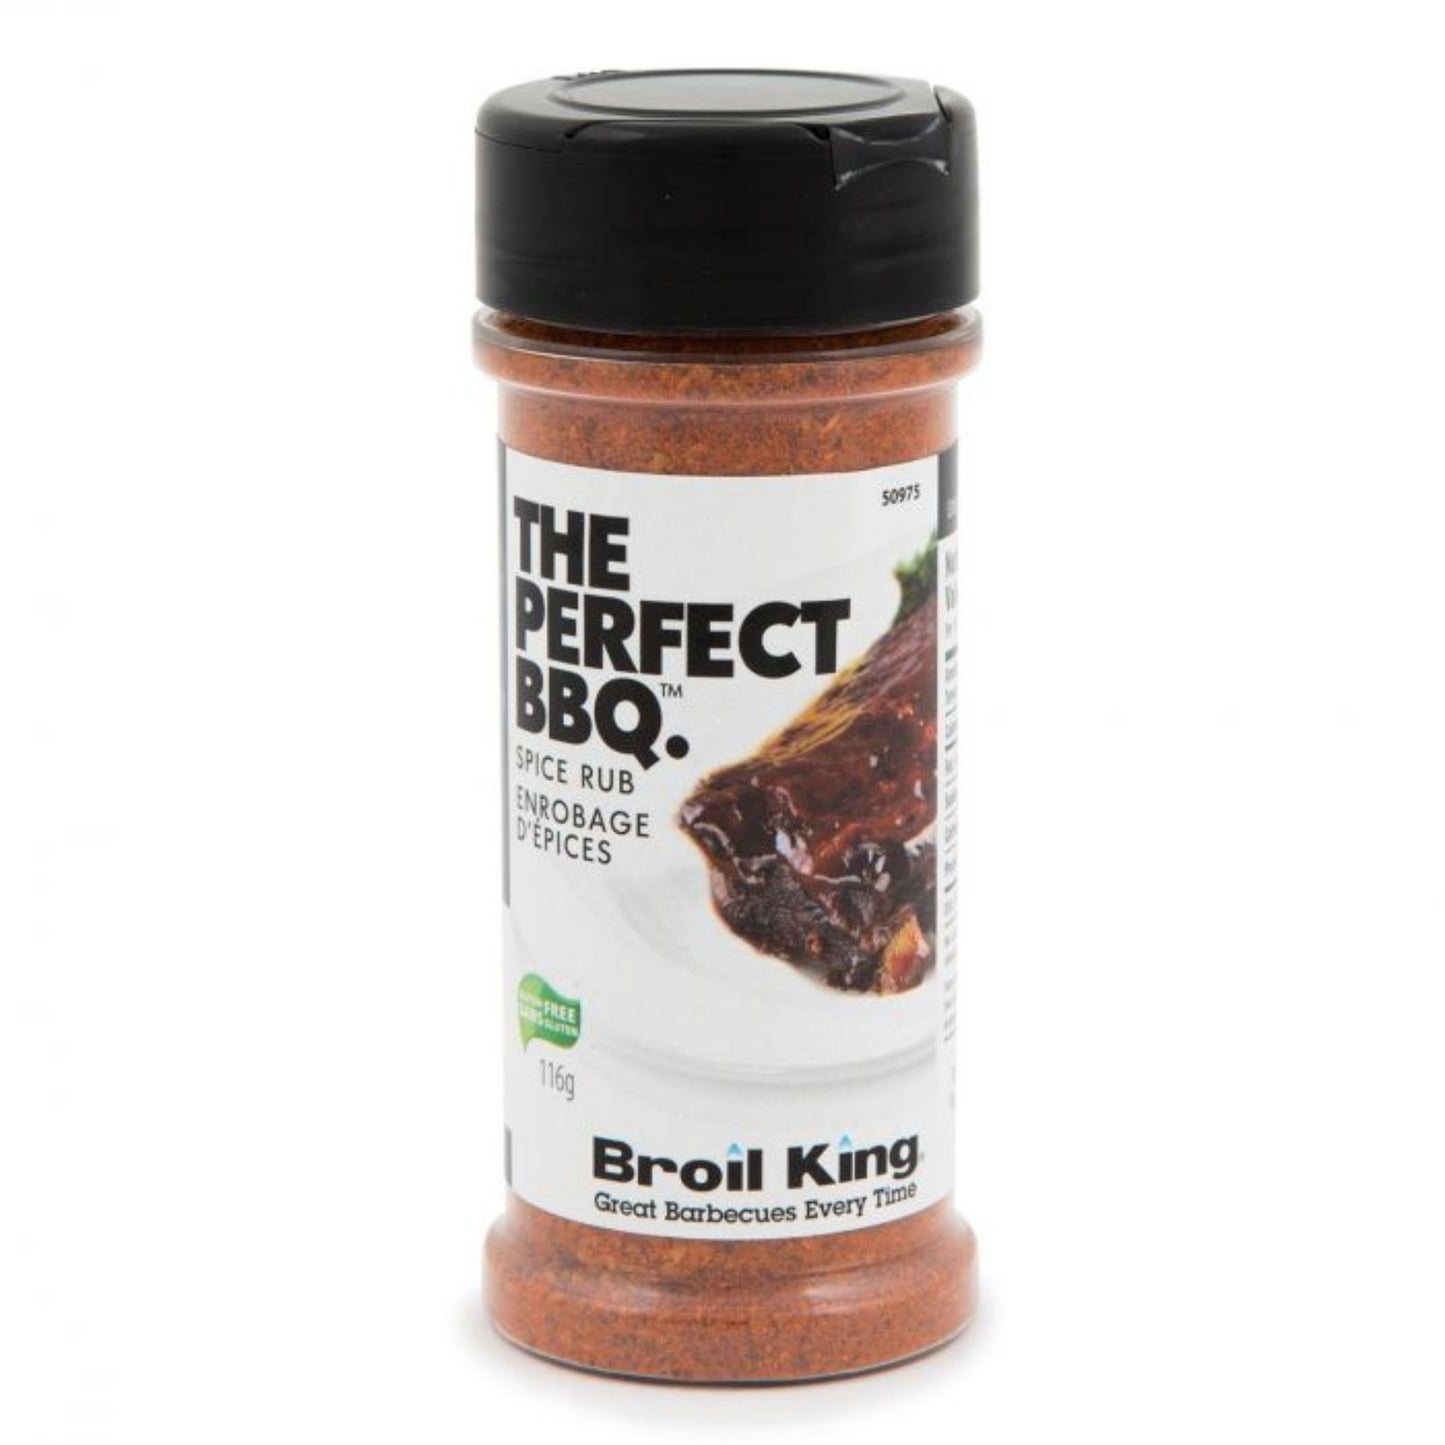 Broil King Perfect Spice Rub